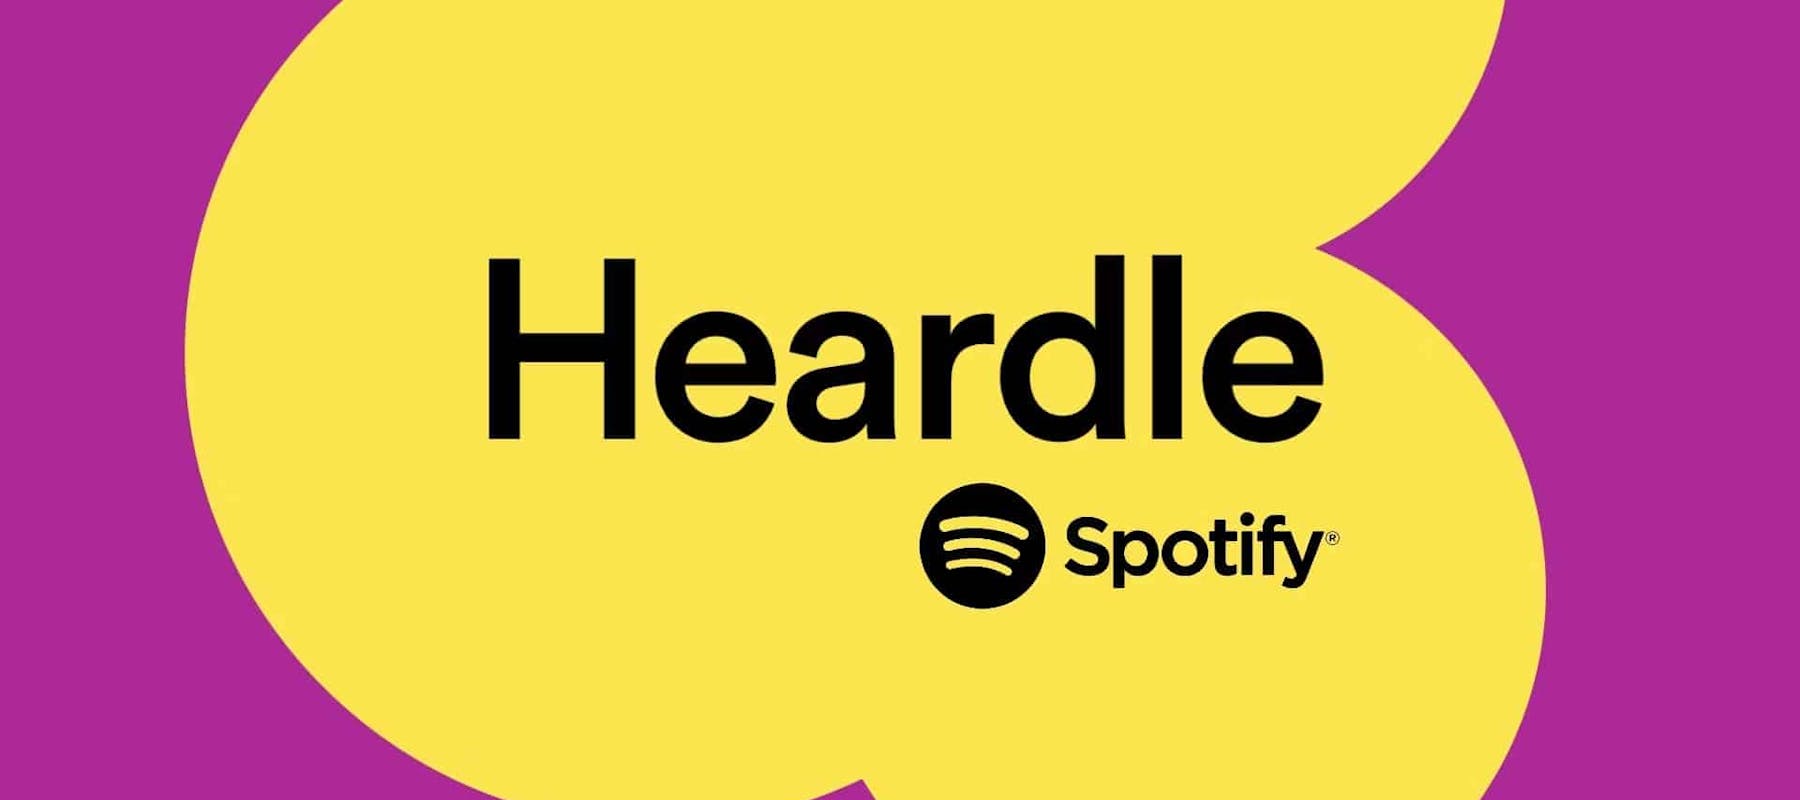 Heardle, a music game by Spotify.